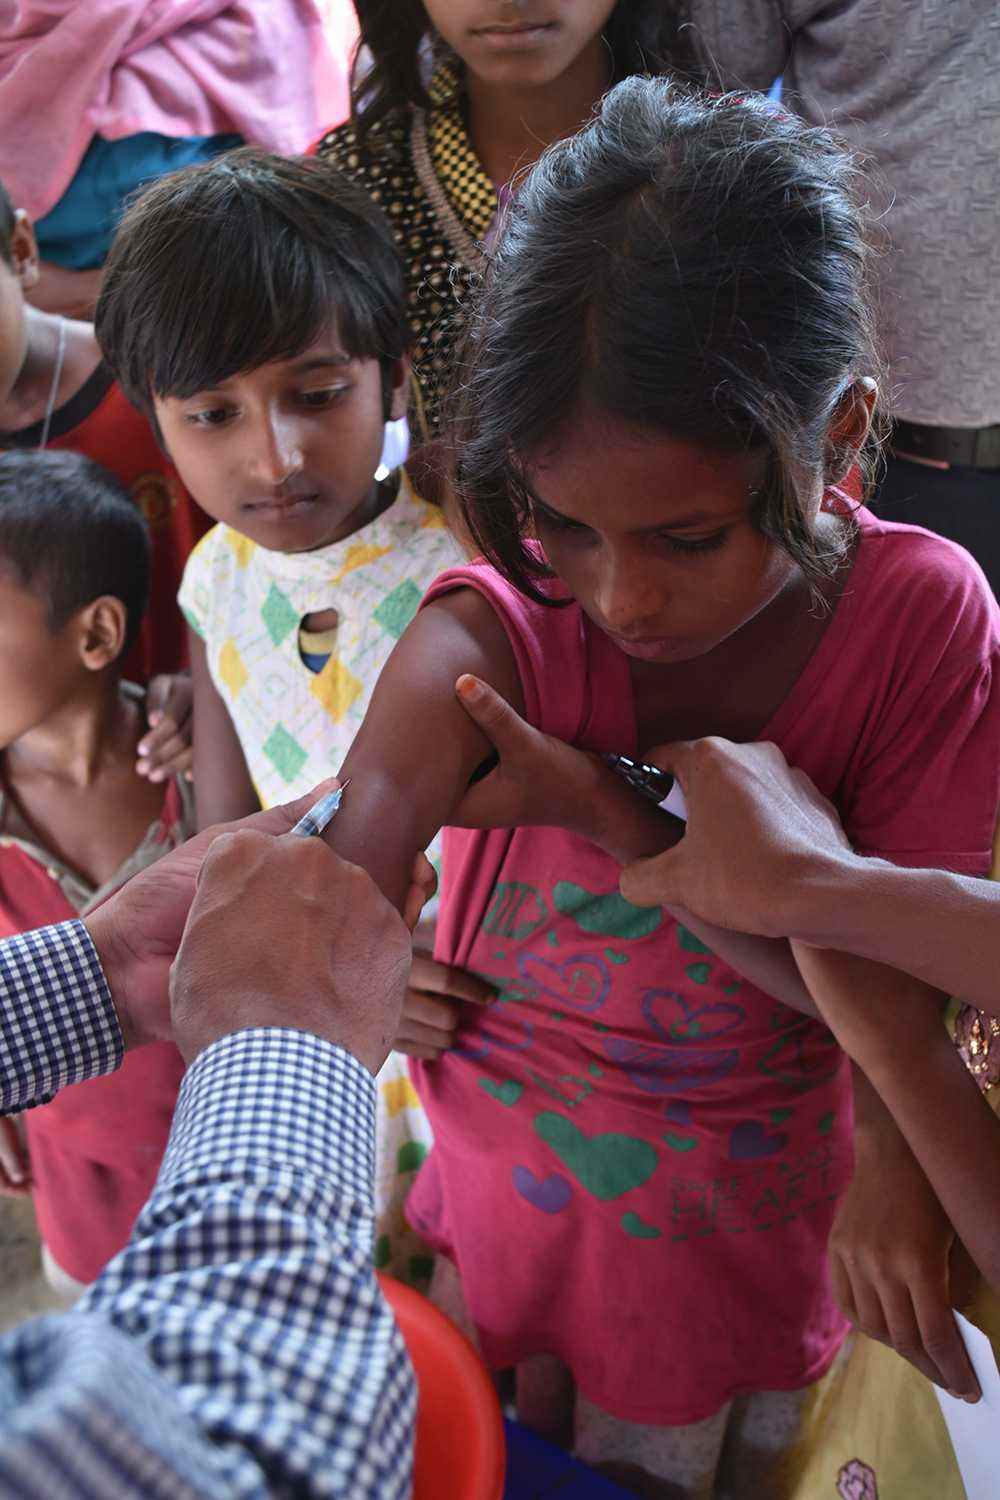 Rohingya children receive an immunisation against measles, which could spread with dangerous speed through crowded refugee camps